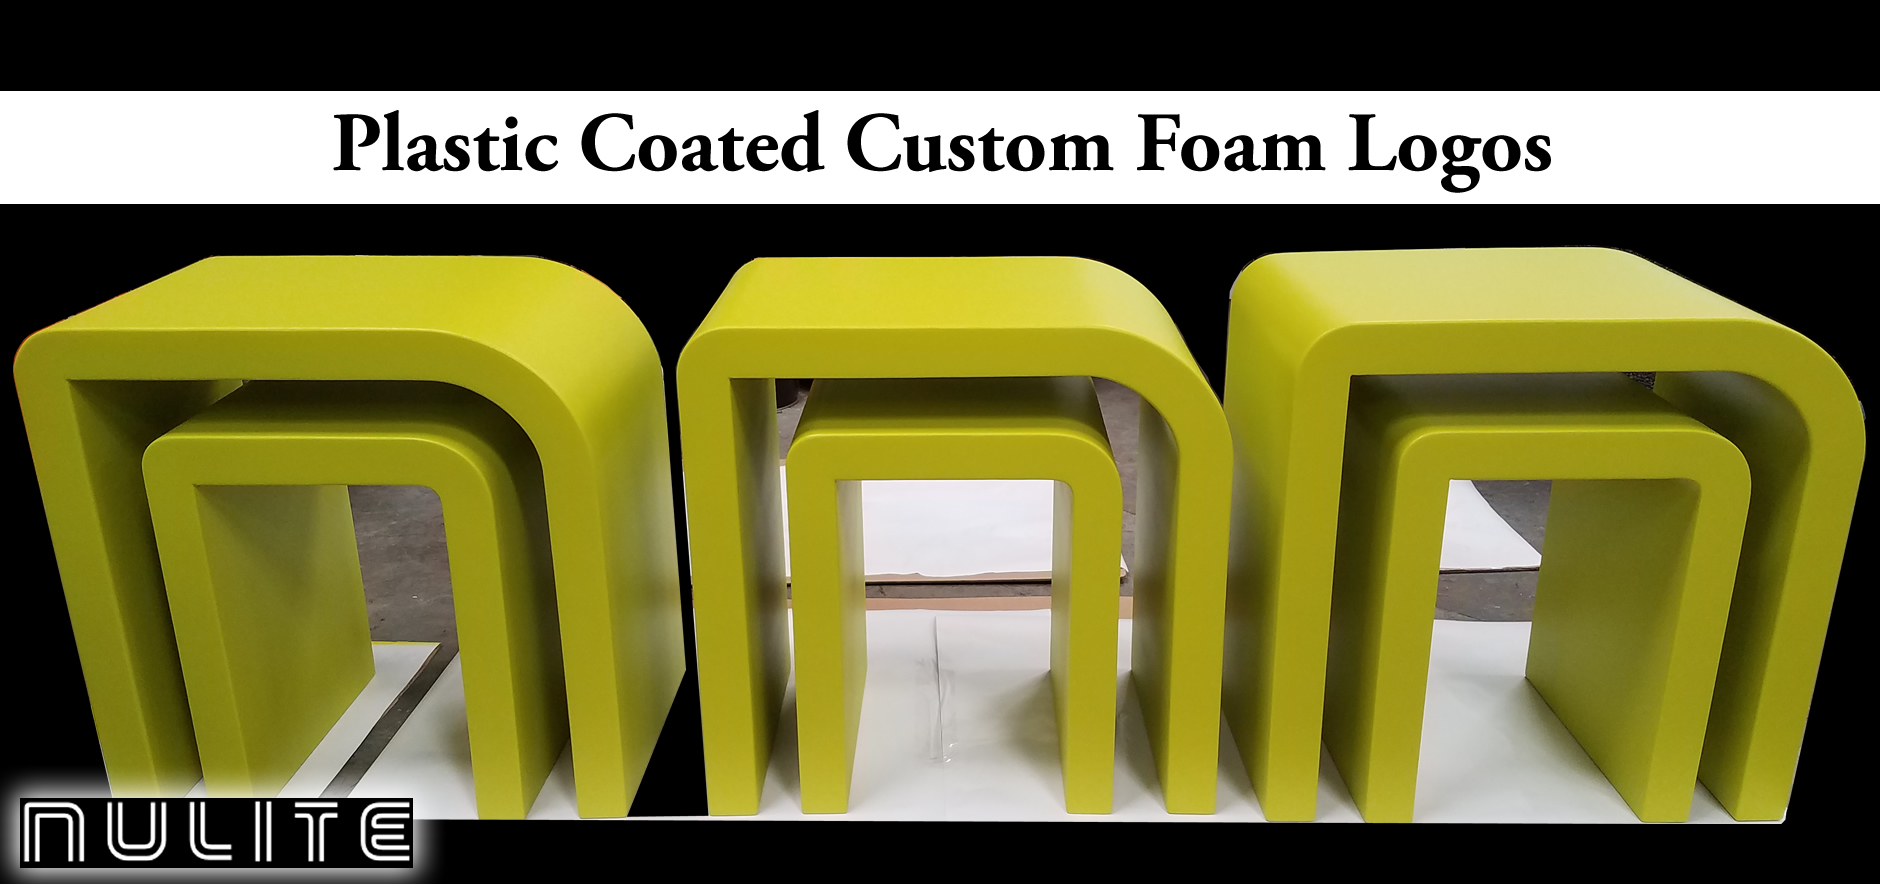 custom foam logo nulite lighting for tradeshows and corporate events